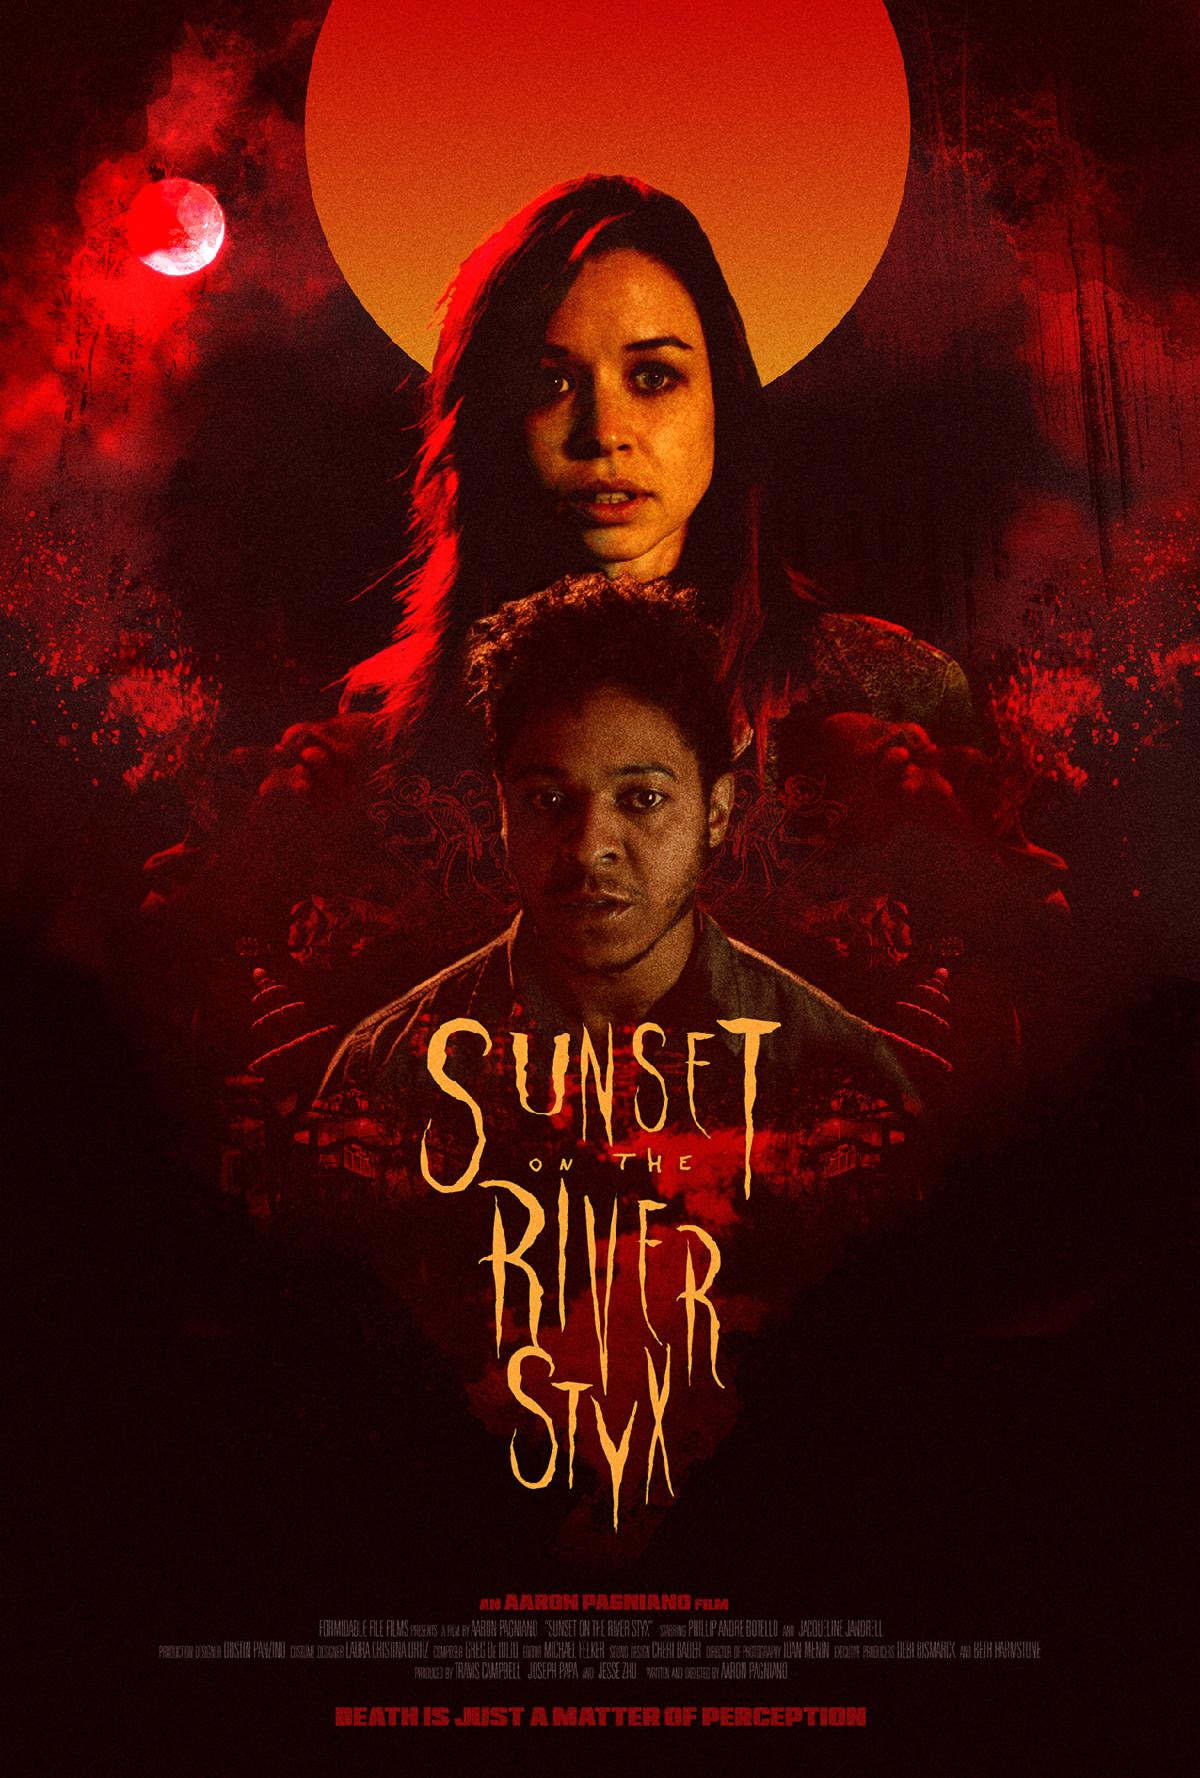 [News] Get a First Look at Aaron Pagniano's SUNSET ON THE RIVER STYX